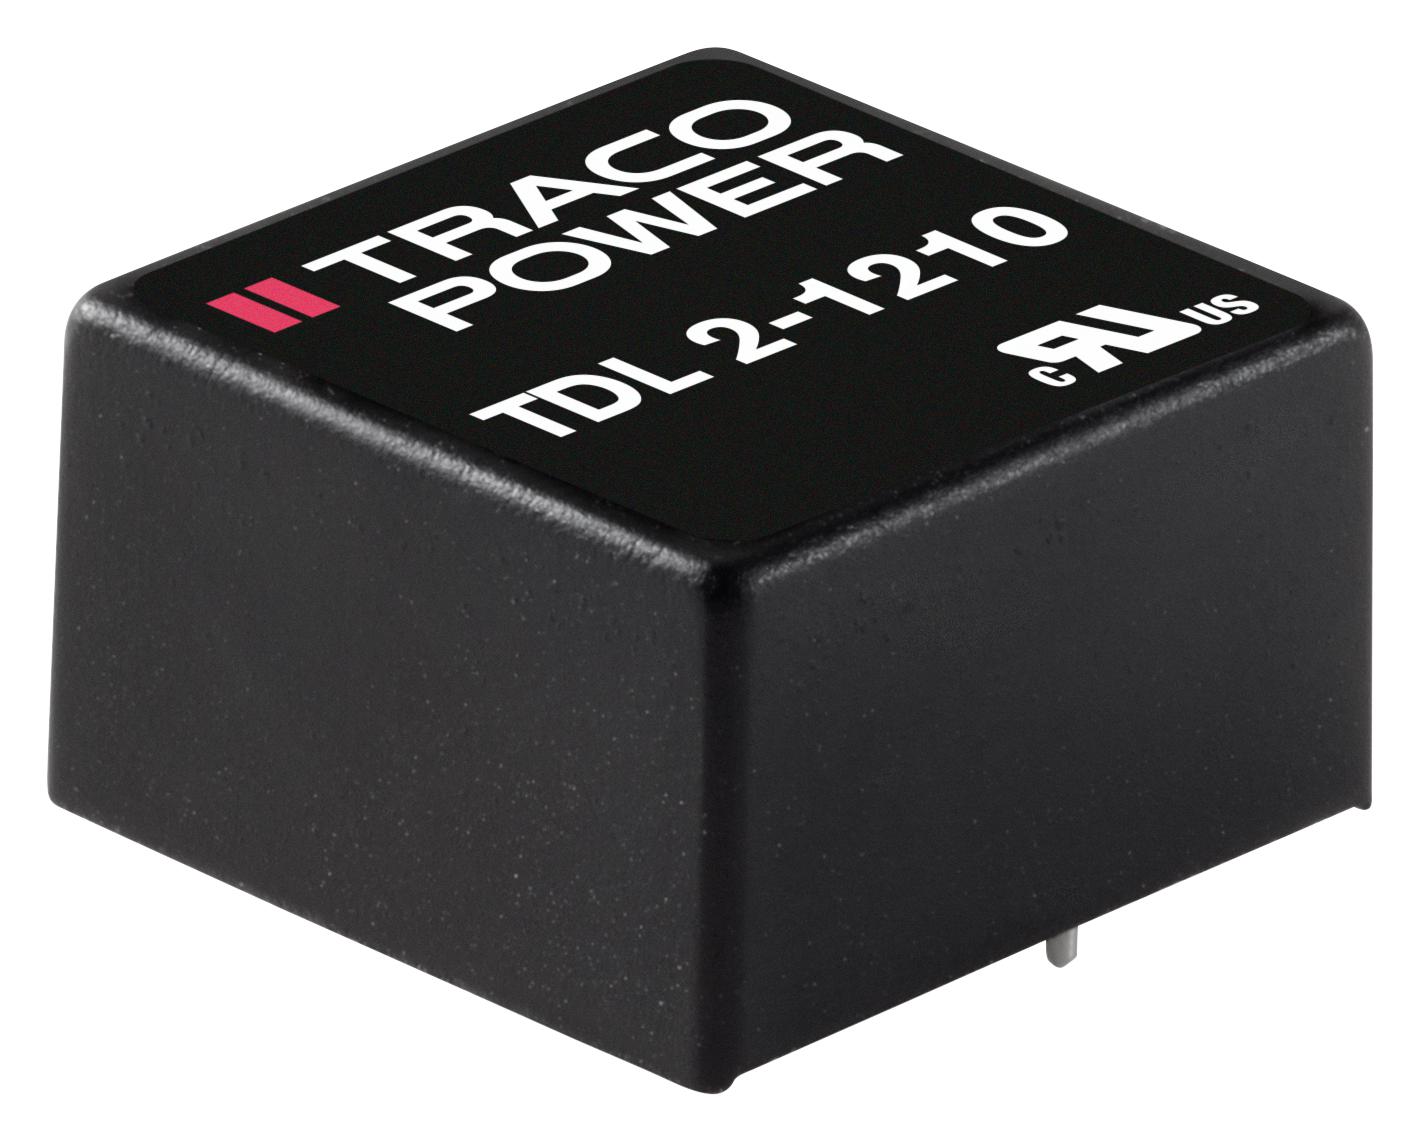 TDL 2-4823 DC-DC CONVERTER, 2 O/P, 2W TRACO POWER